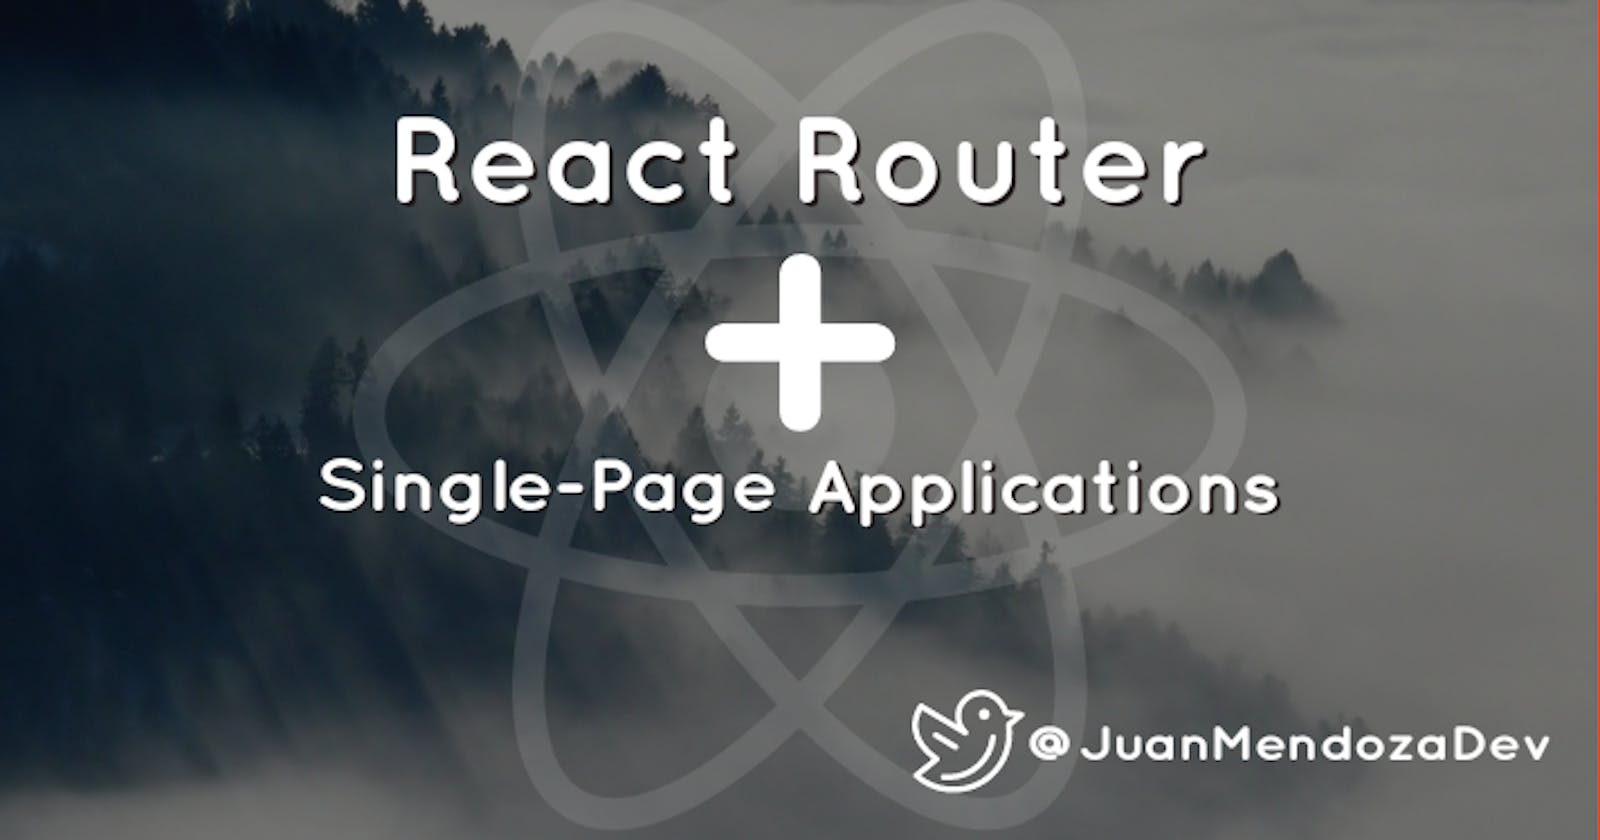 Introduction to React Router and Single-Page Applications